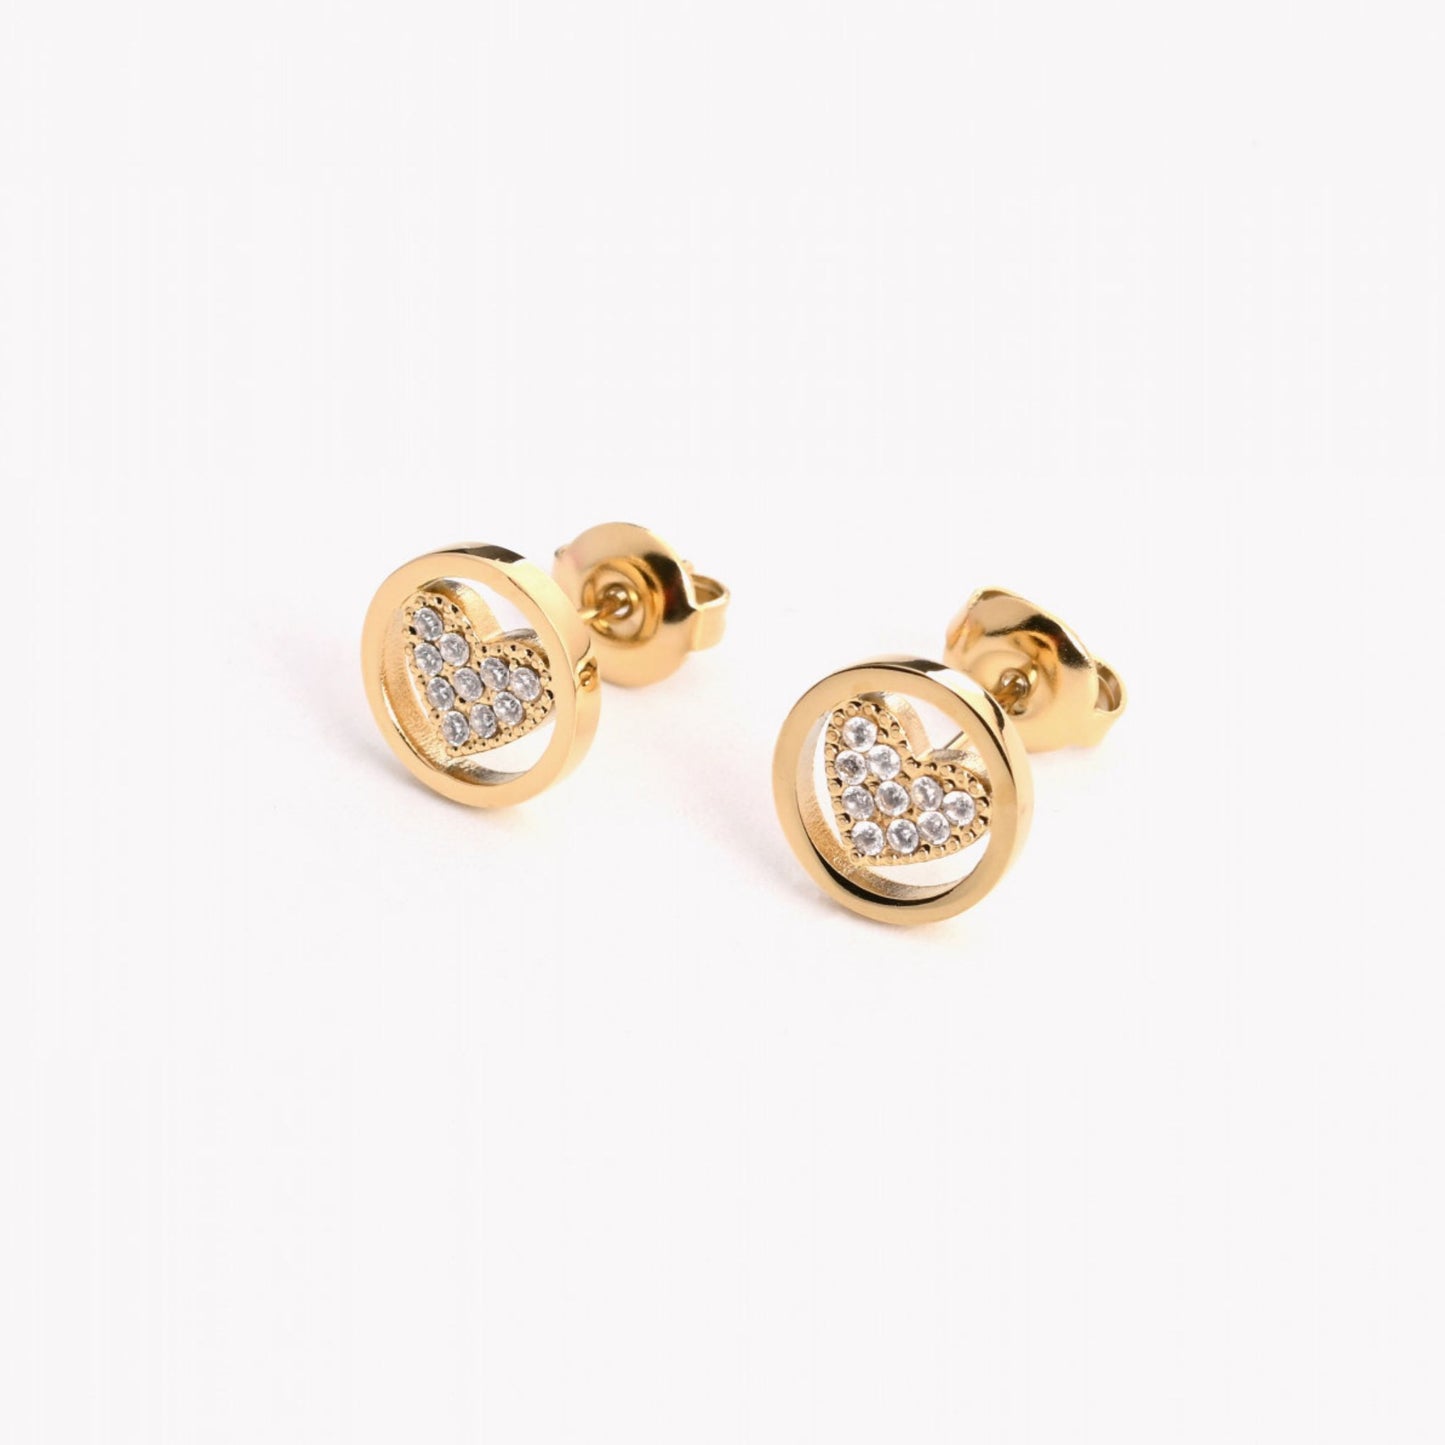 HEART | Short round earrings with heart in stainless steel and zirconia